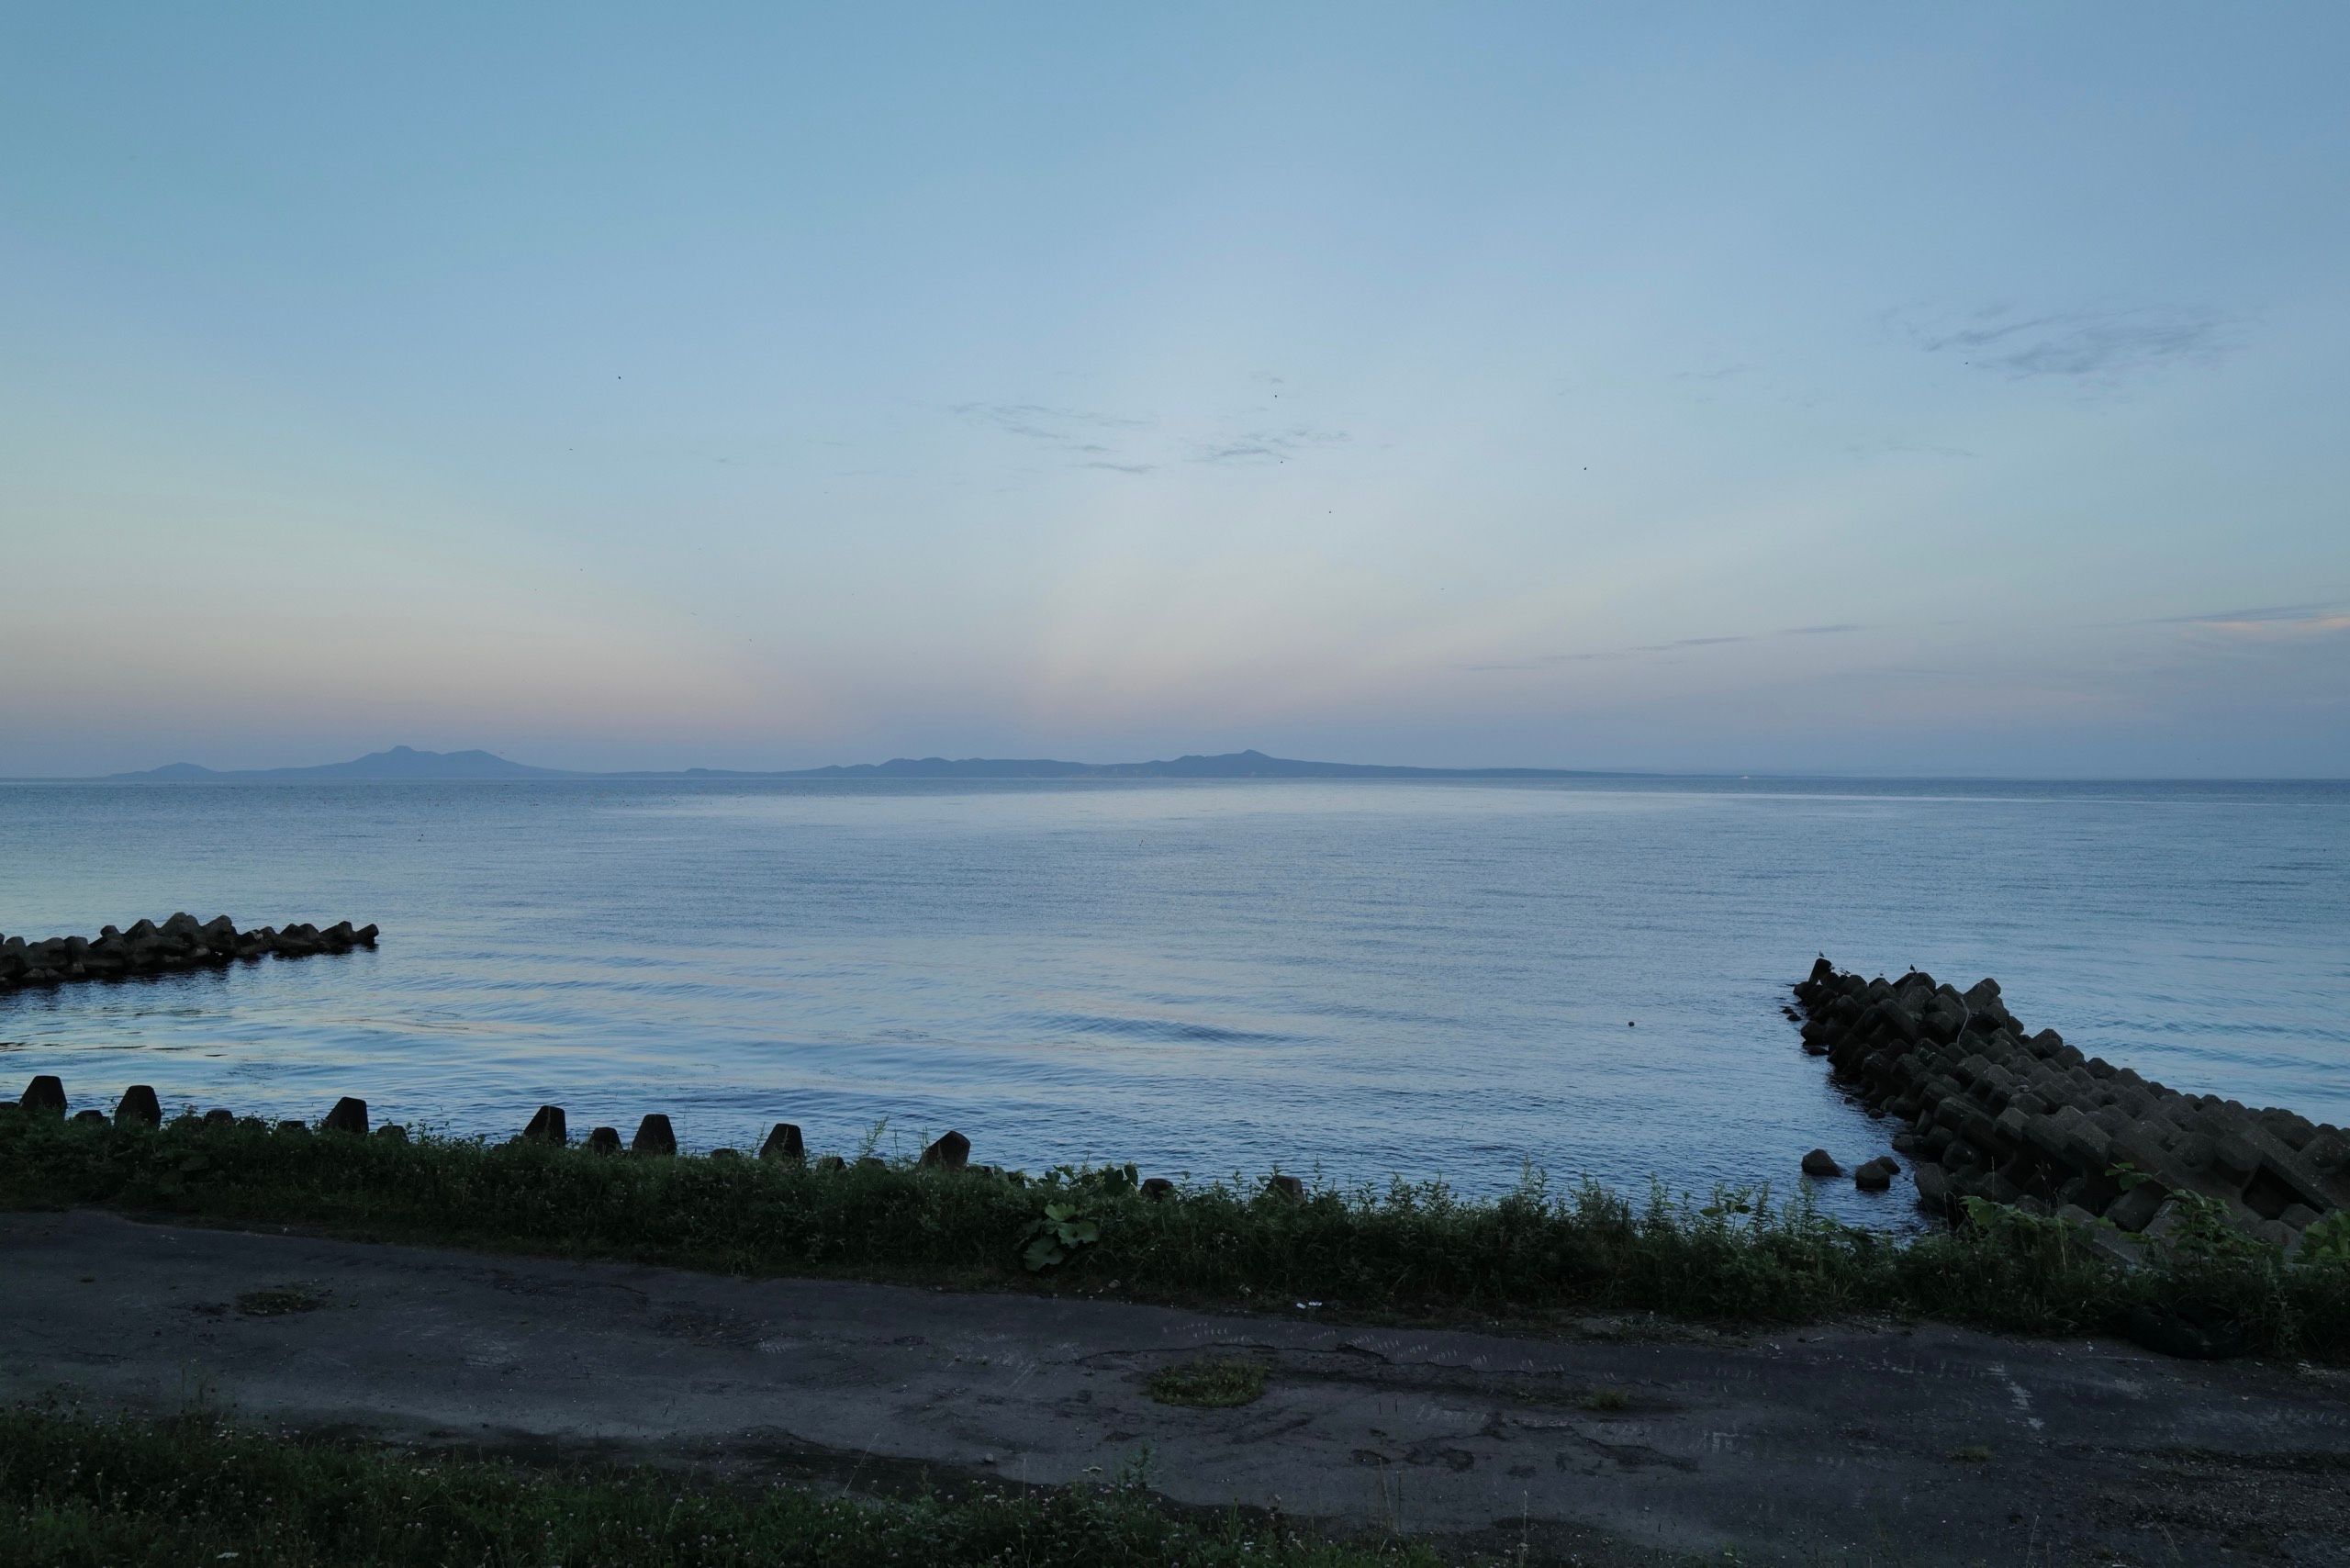 Looking out across the sea at dusk on an island and its chain of volcanoes.